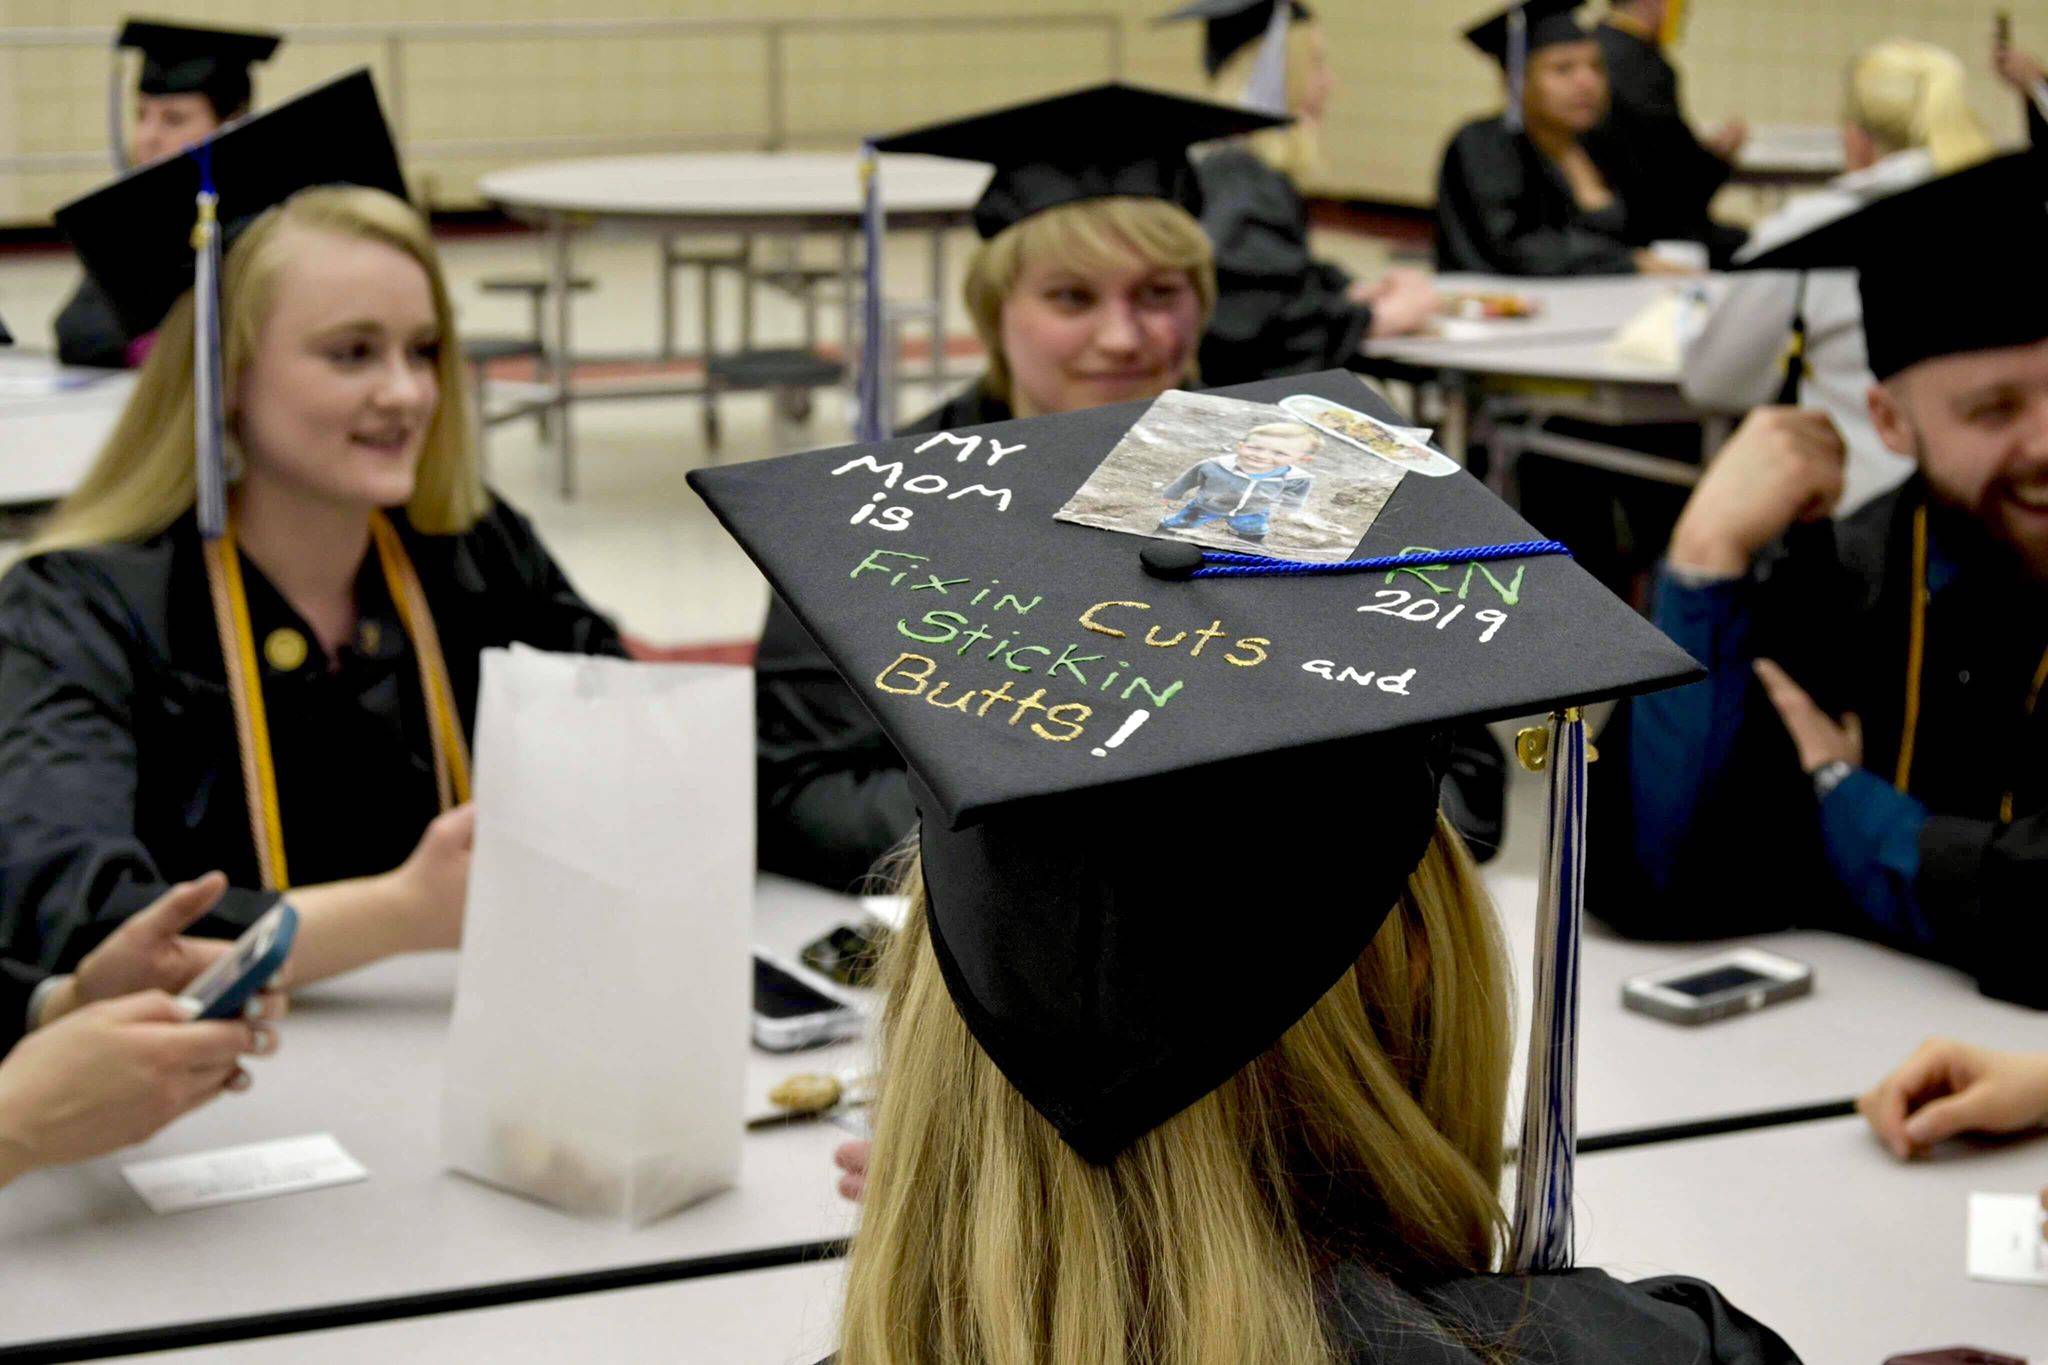 A group of nursing graduates from Kenai Peninsula College’s Kenai River Campus get ready to walk the stage and receive their degrees on Thursday, May 9, 2019, at Kenai Central High School in Kenai, Alaska. (Photo by Victoria Petersen/Peninsula Clarion)